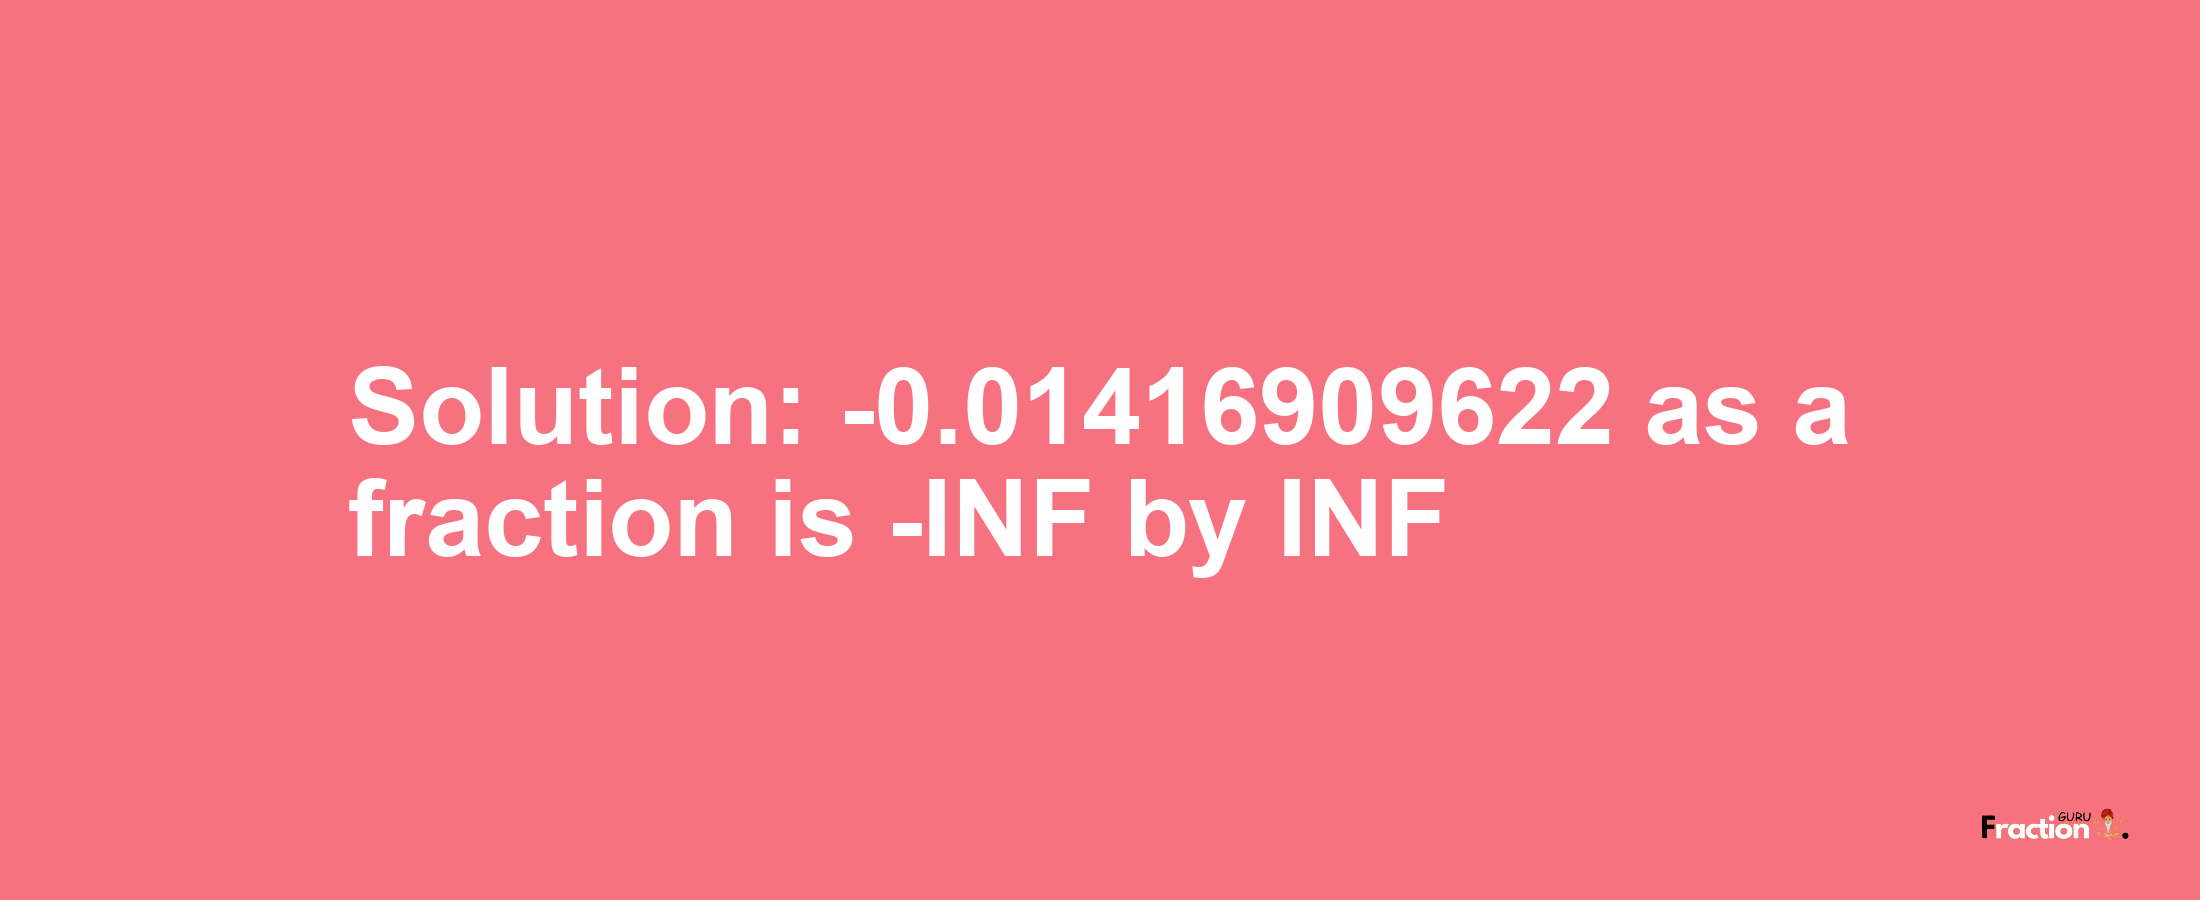 Solution:-0.01416909622 as a fraction is -INF/INF